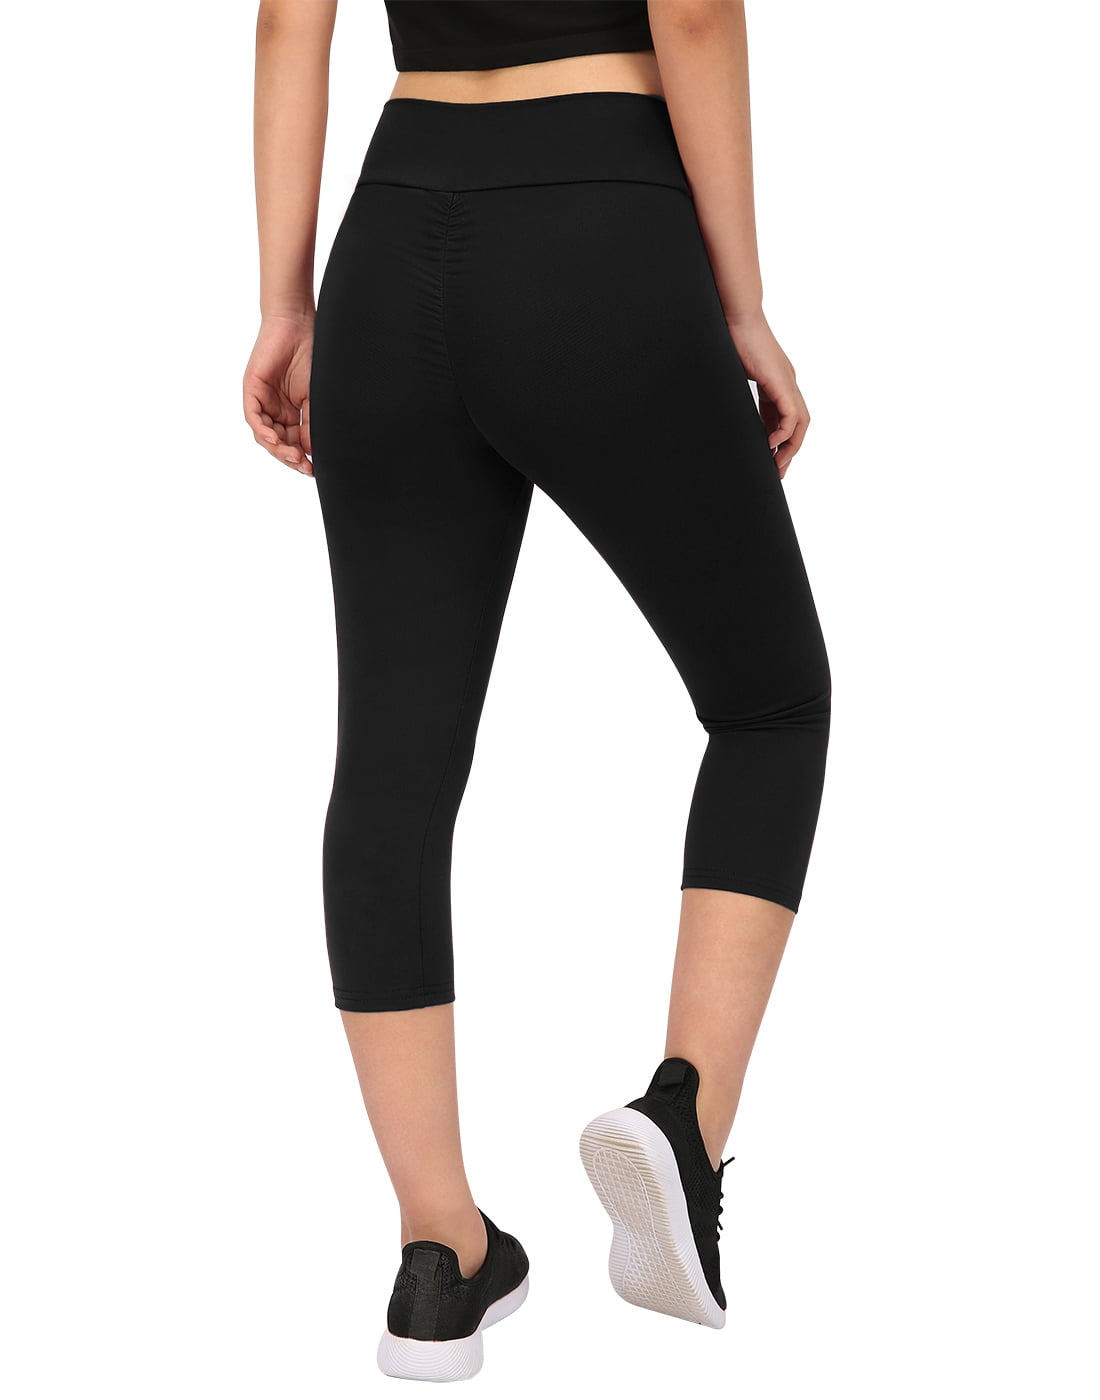 6 Day High Waisted Black Workout Leggings for Gym